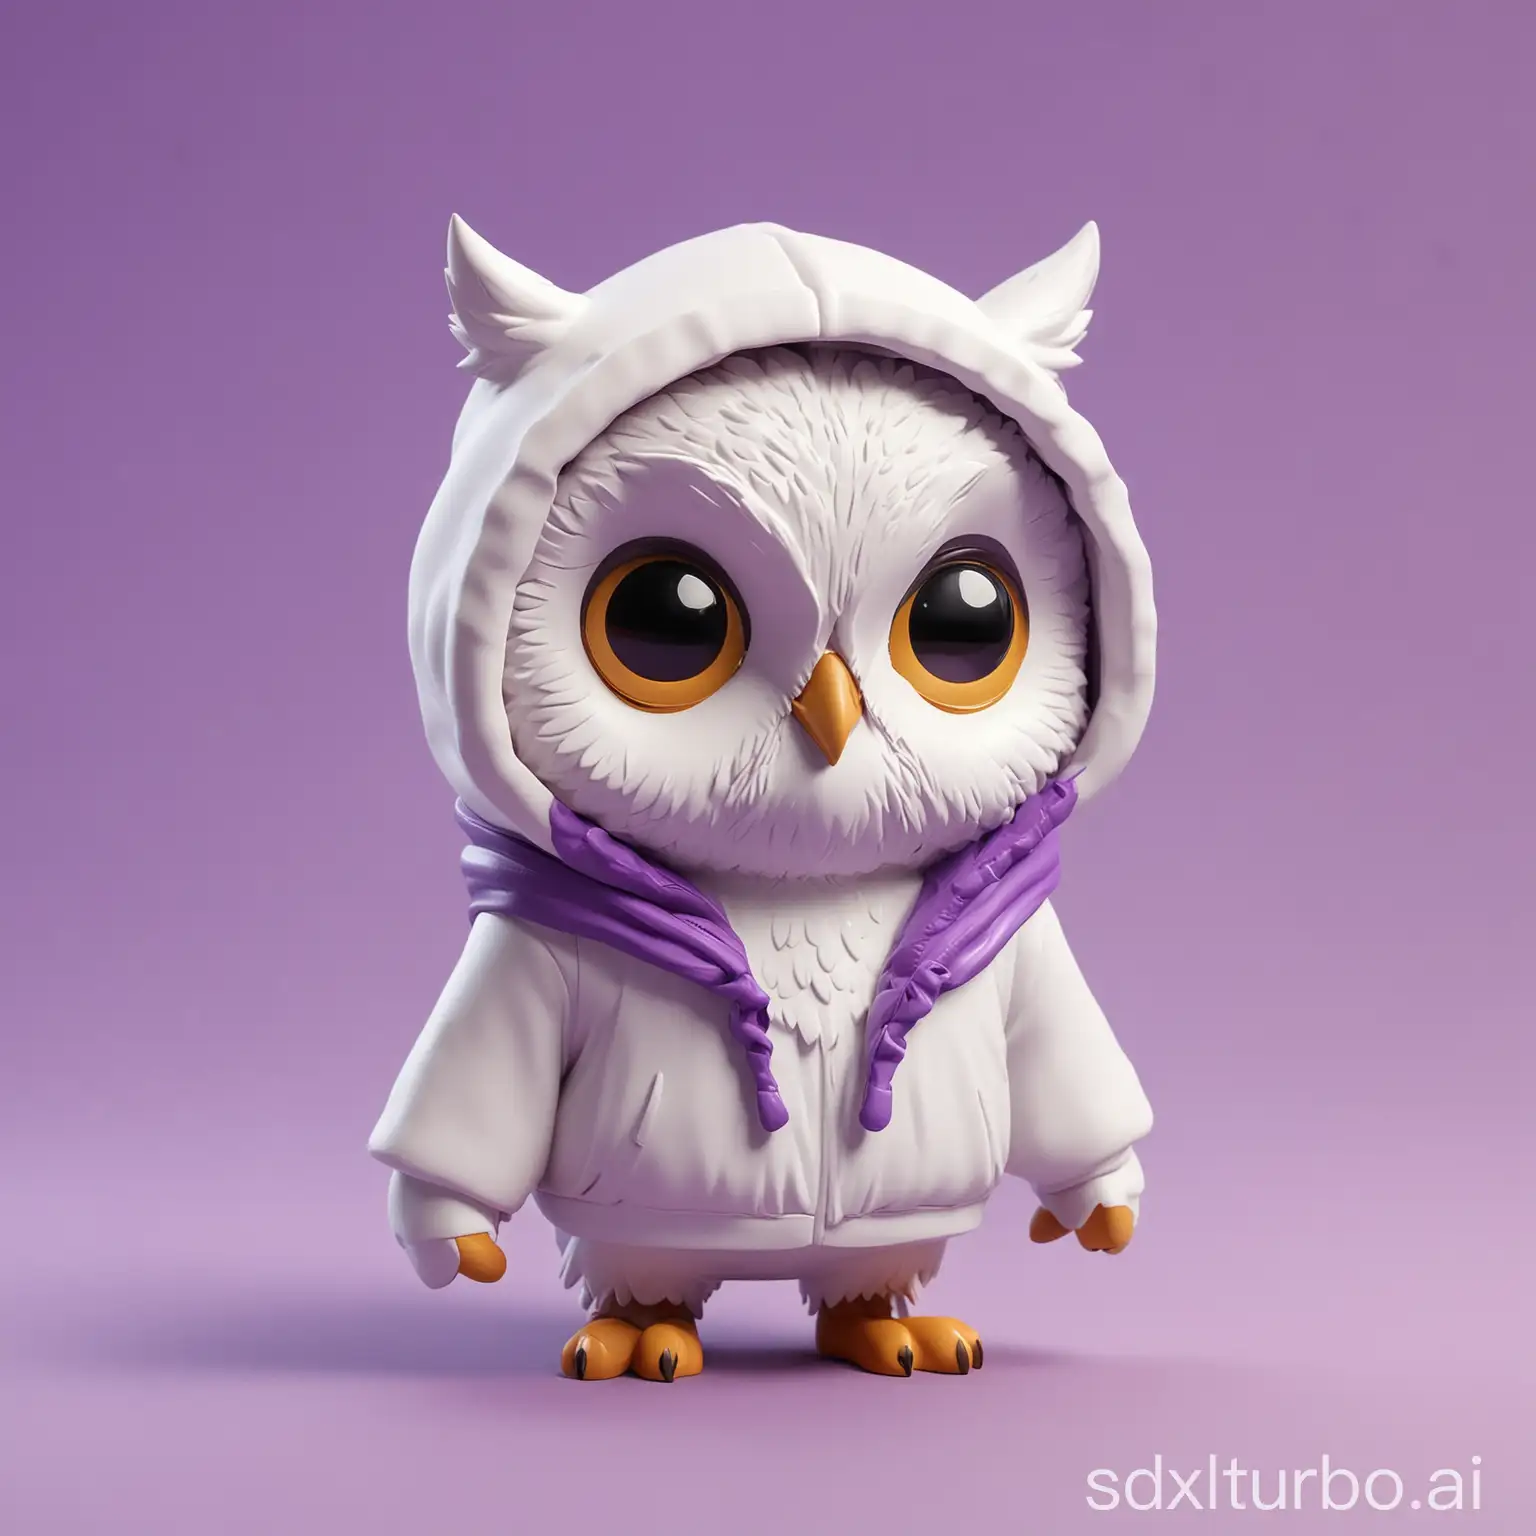 Chibi-Owl-Vinyl-Toy-3D-Character-in-White-Hoodie-on-Purple-Background